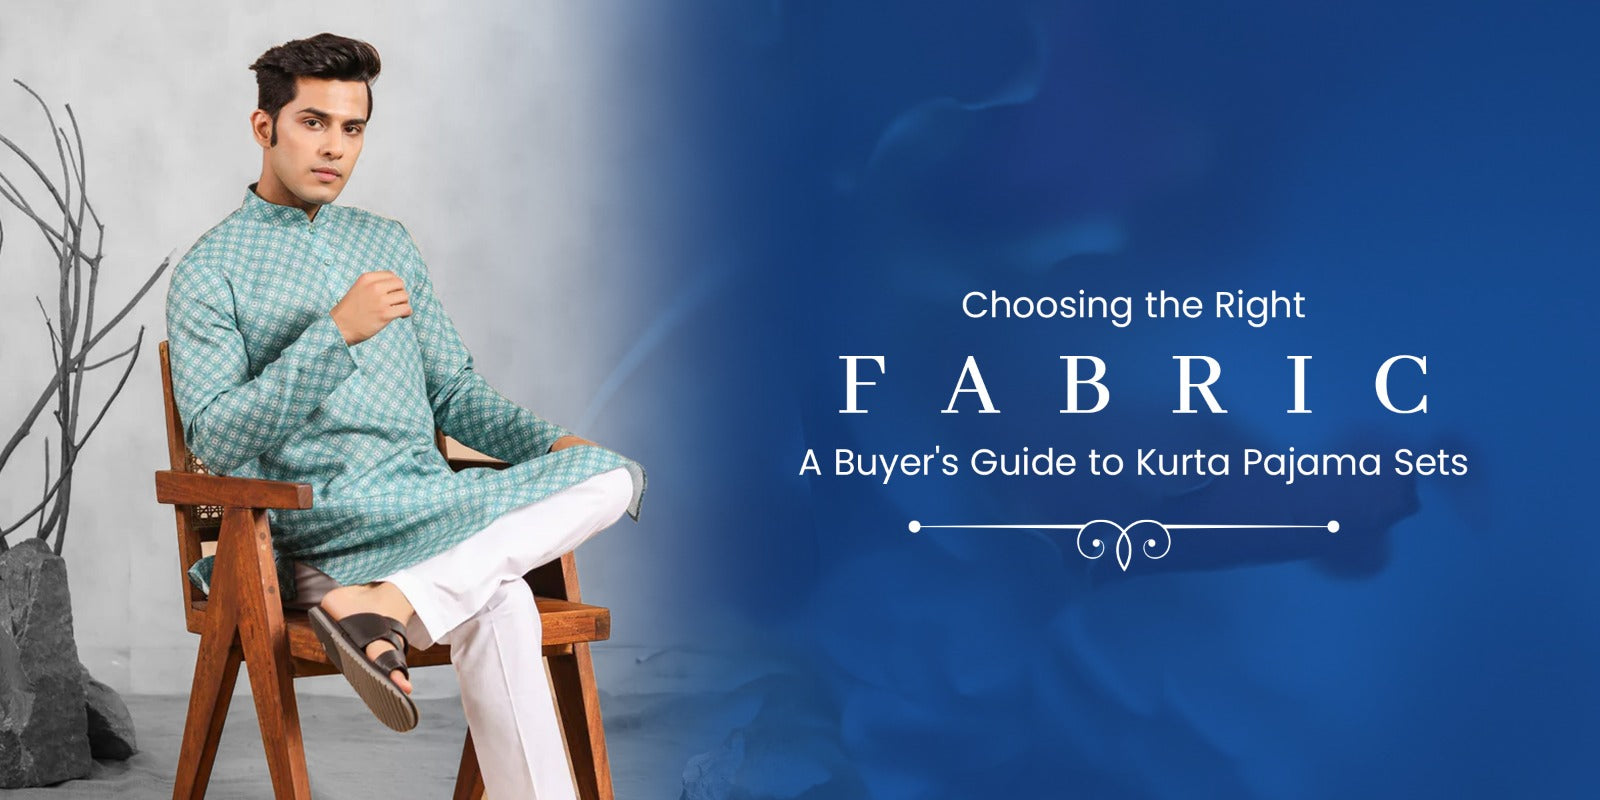 Choosing the Right Fabric: A Buyer's Guide to Kurta Pajama Sets